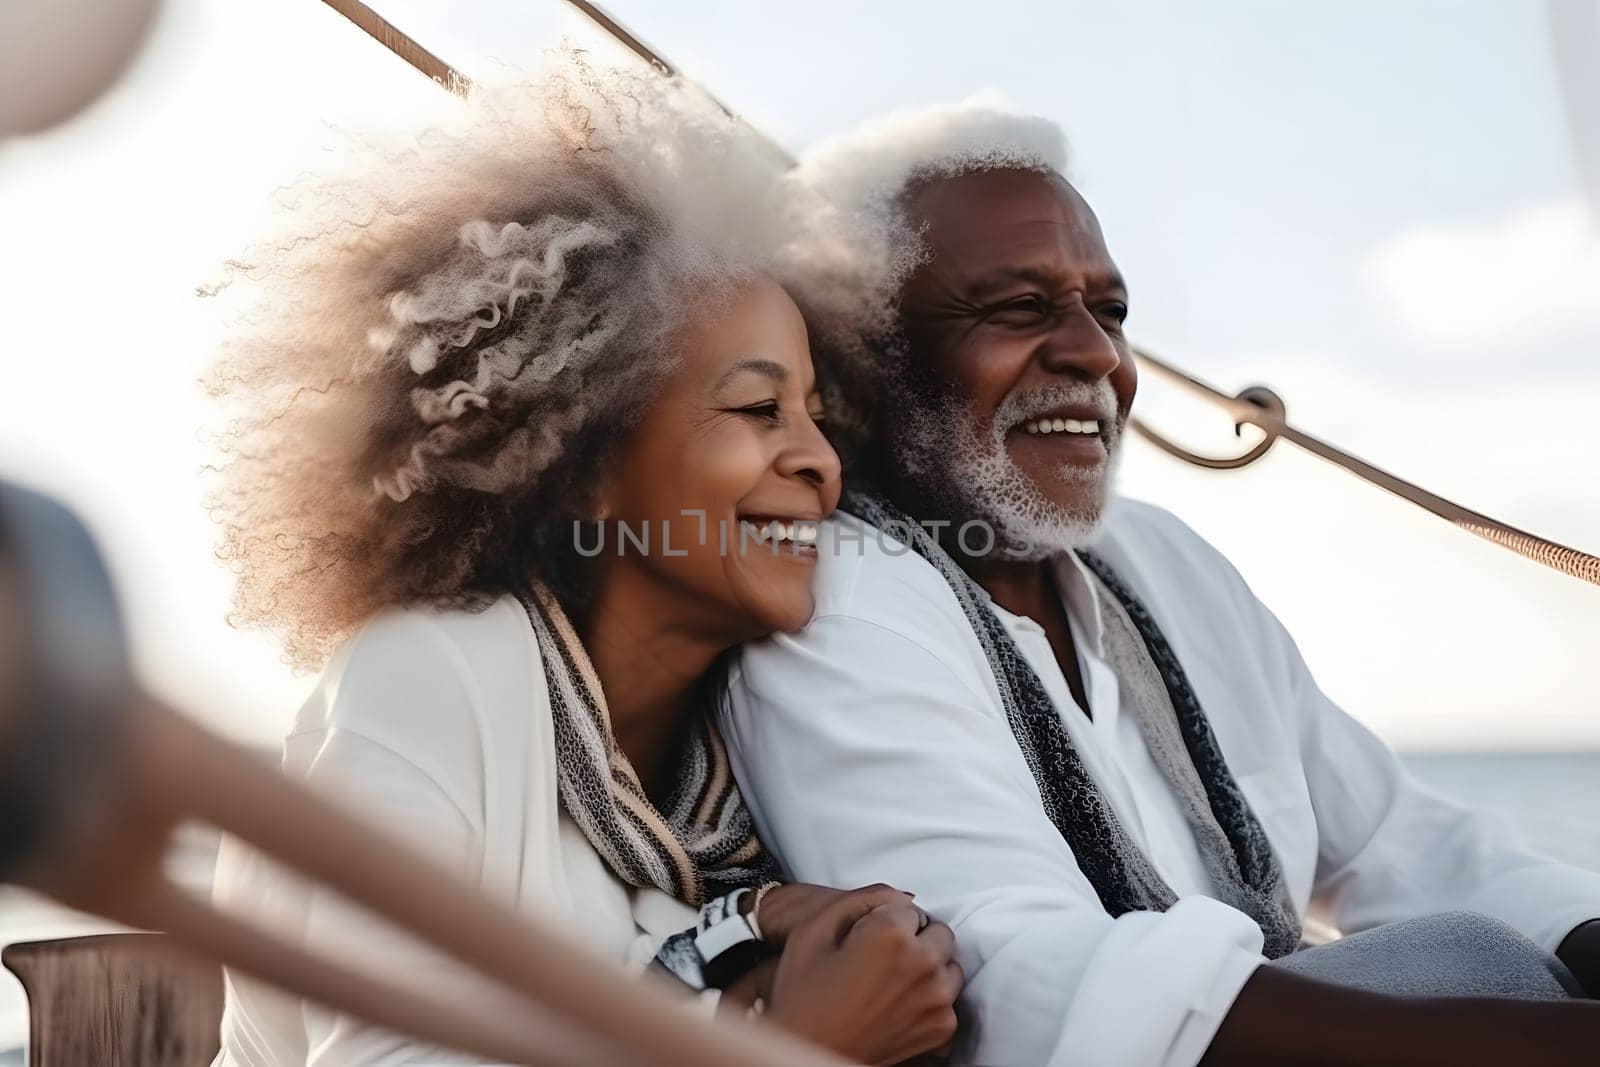 Beautiful and happy senior african american couple on a sailboat at day, neural network generated image by z1b